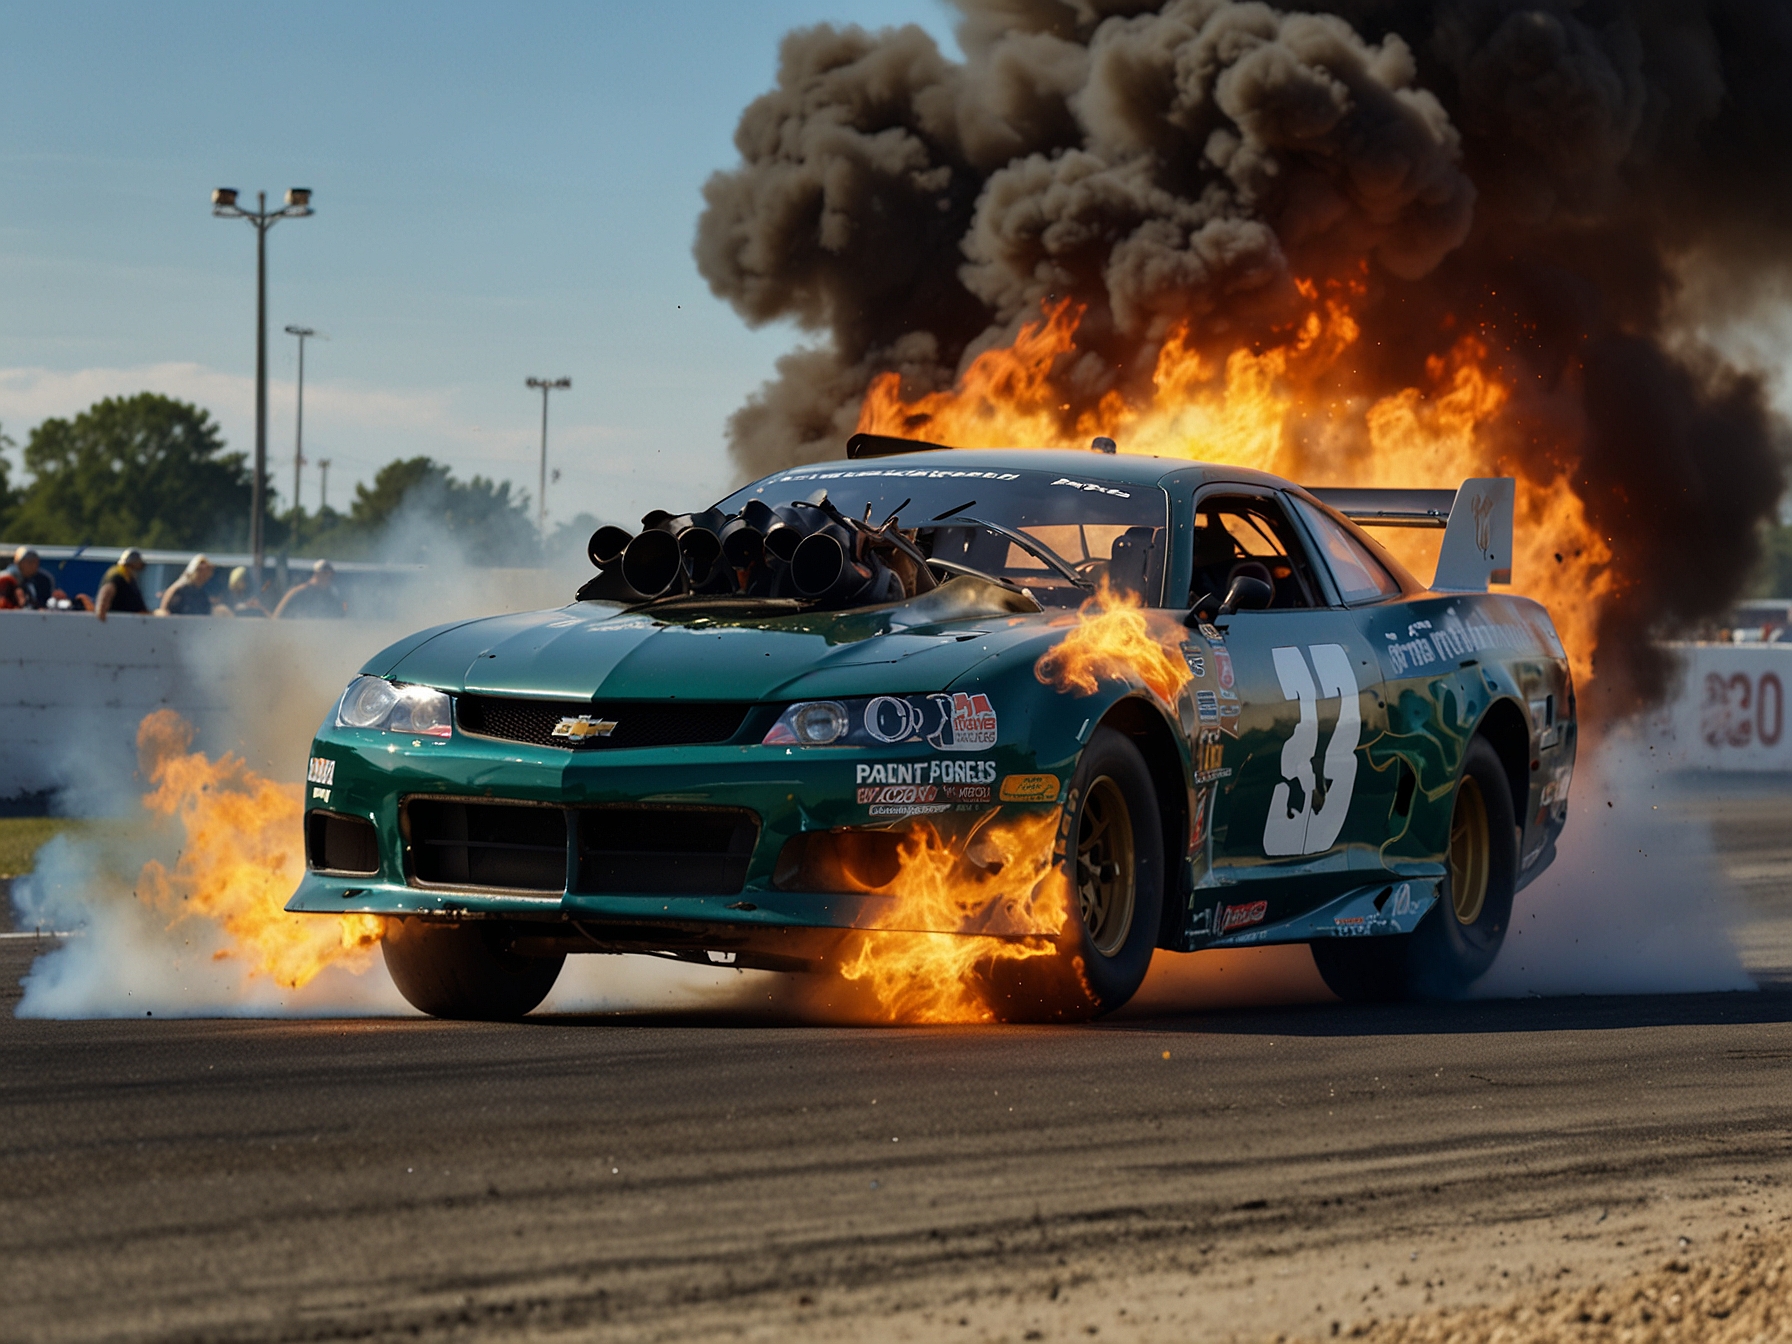 The image depicts John Force's drag racing car in flames following an engine explosion at a Virginia track. Emergency responders work quickly to extinguish the fire and extract Force from the wreckage.